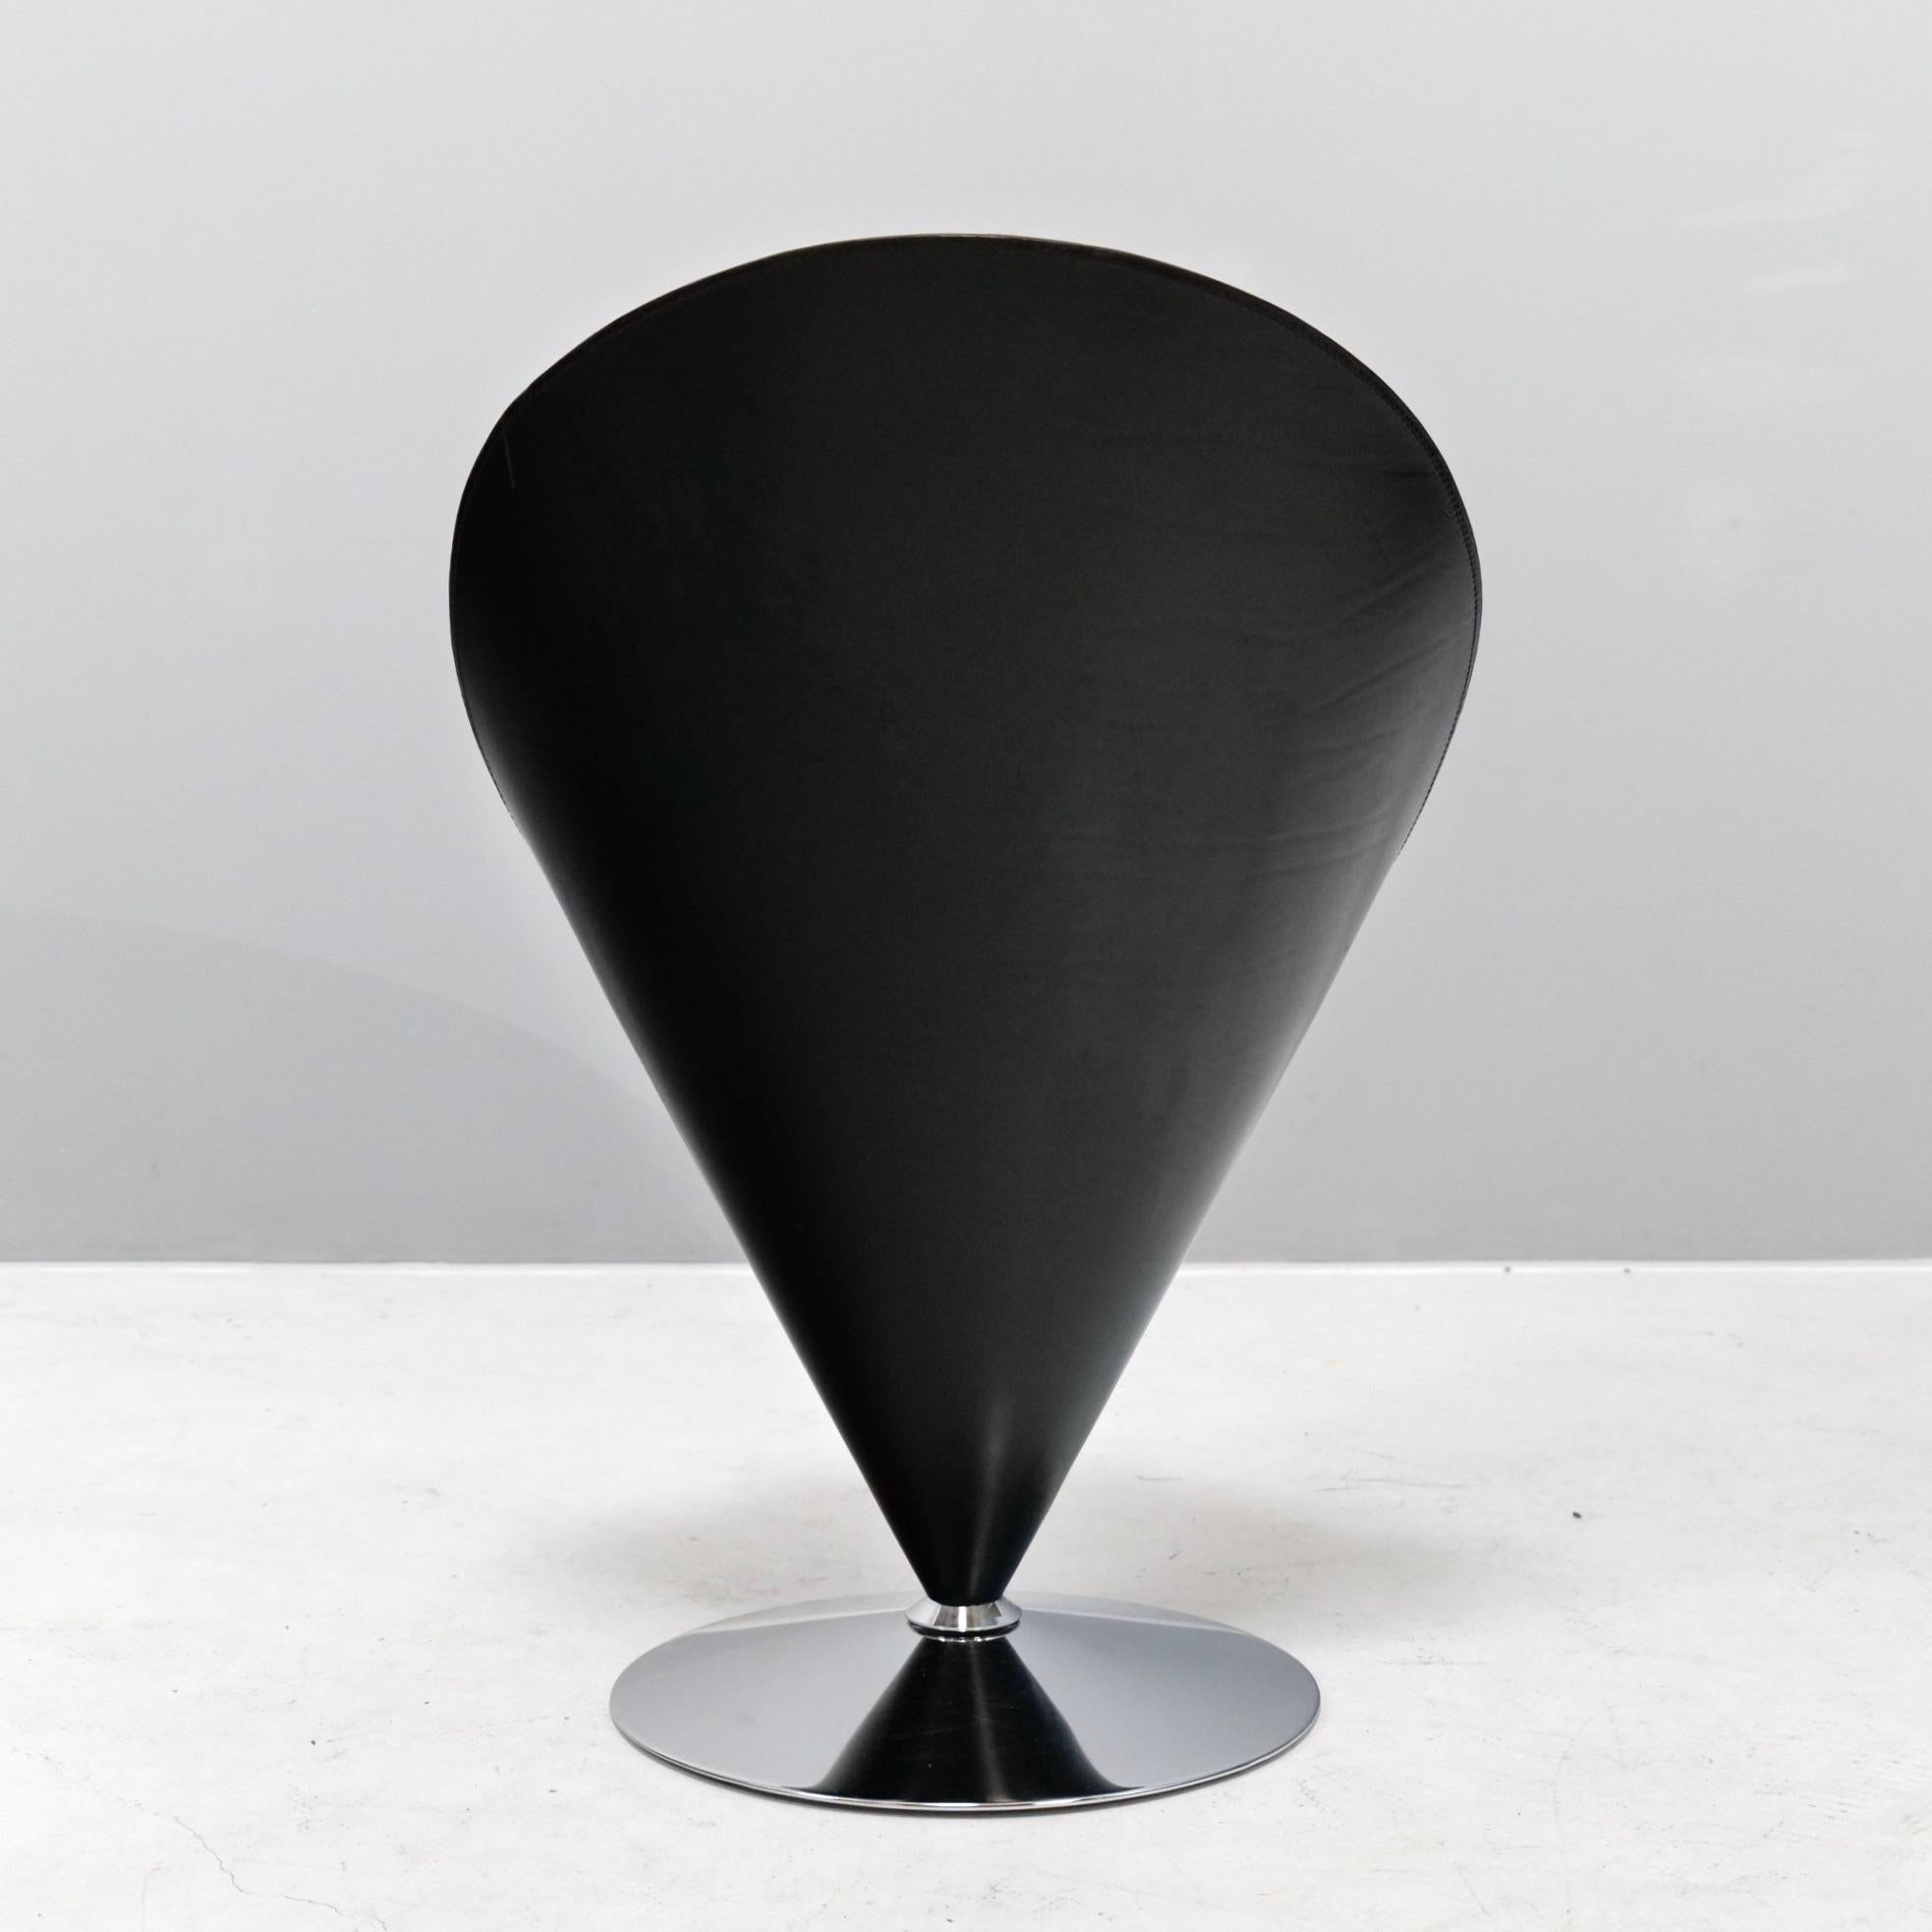 Space Age Verner Panton Leather Cone Chair VP01, Type B, 1994 Limited Edition  For Sale